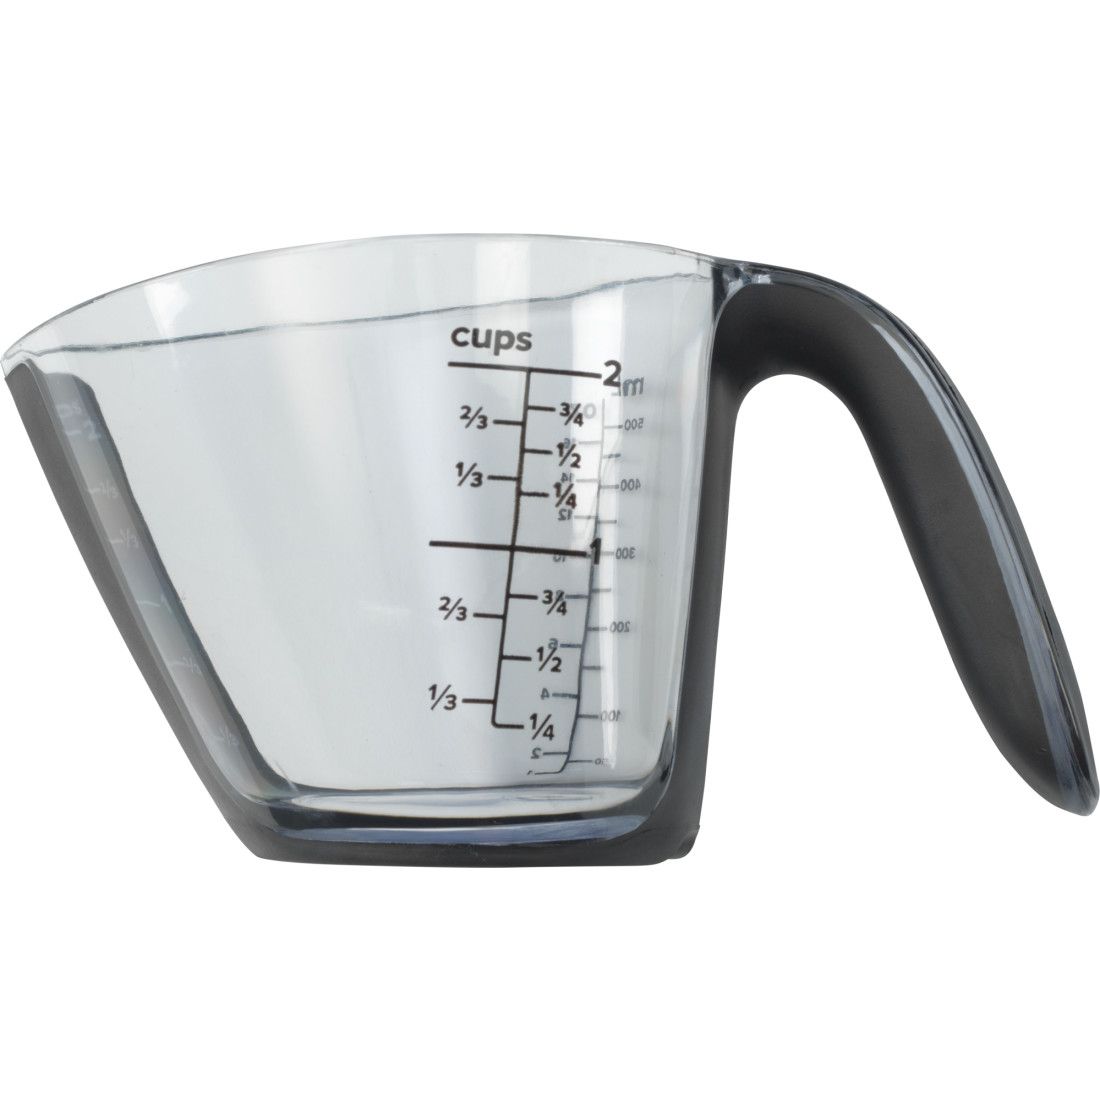 GoodCook 2-Cup (500 ml.) Plastic Liquid Measuring Cup, Clear